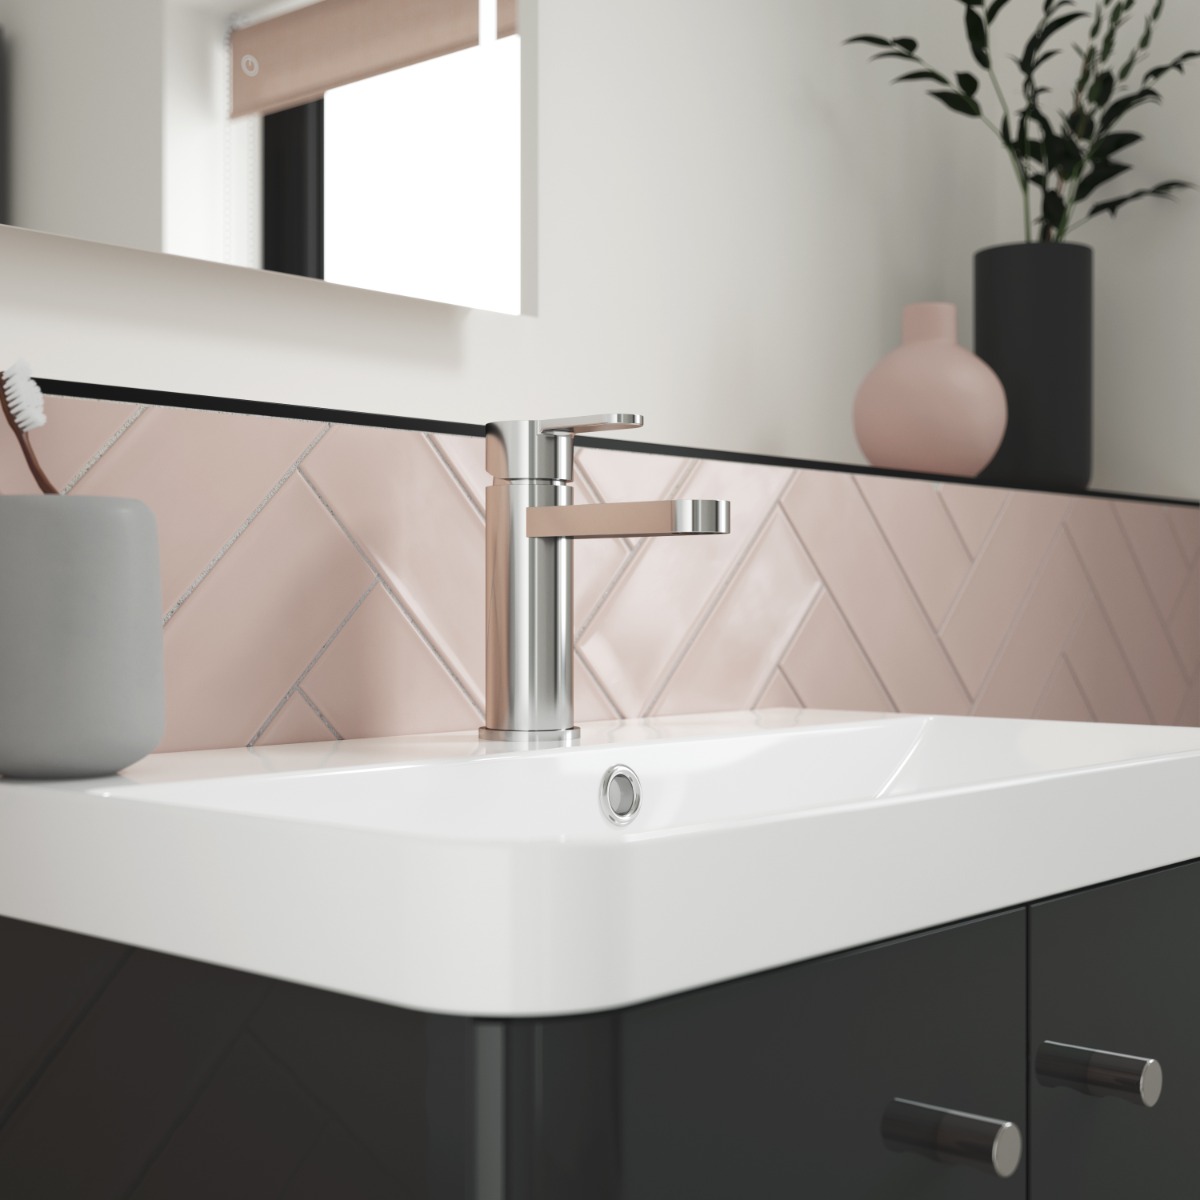 chome tap in pink bathroom